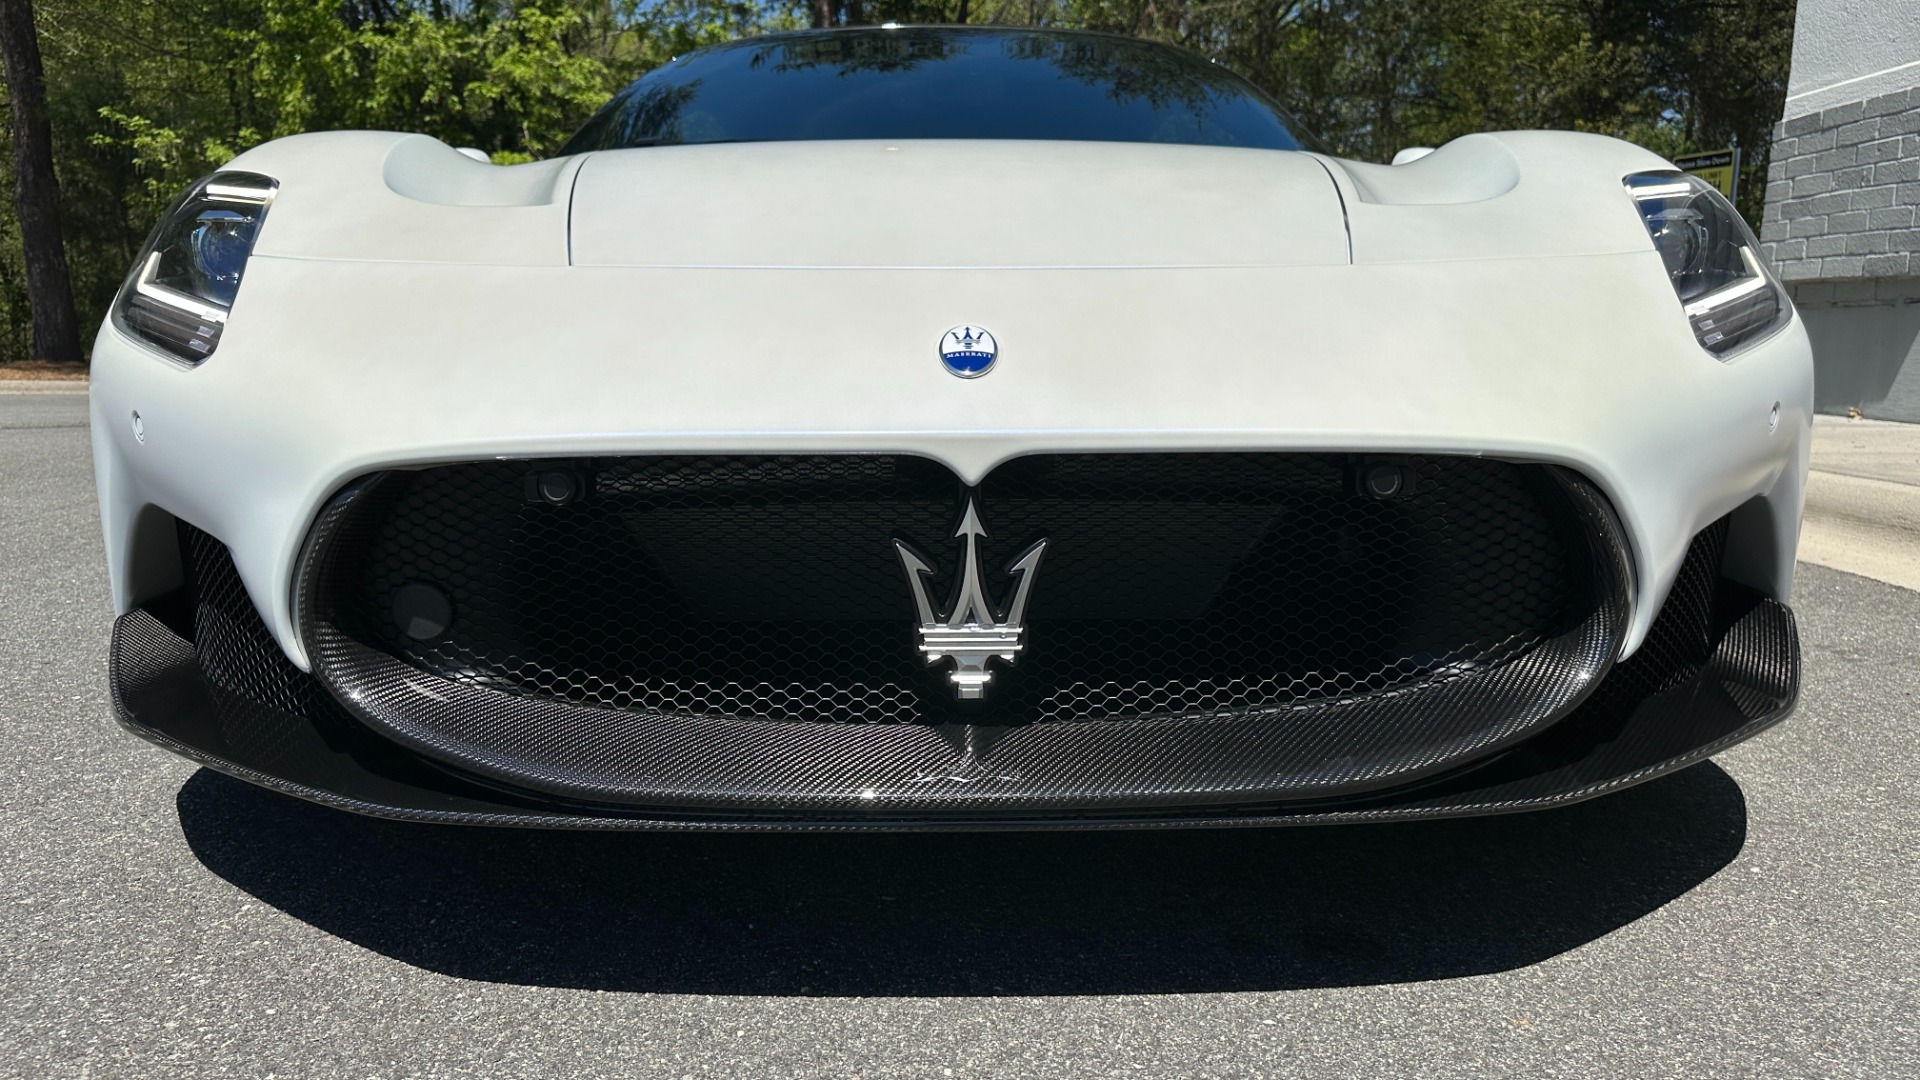 Used 2022 Maserati MC20 TWIN TURBO V6 / $35K FULL CARBON PKG / FRONT LIFT / MATTE PAINT / PPF for sale $278,000 at Formula Imports in Charlotte NC 28227 8